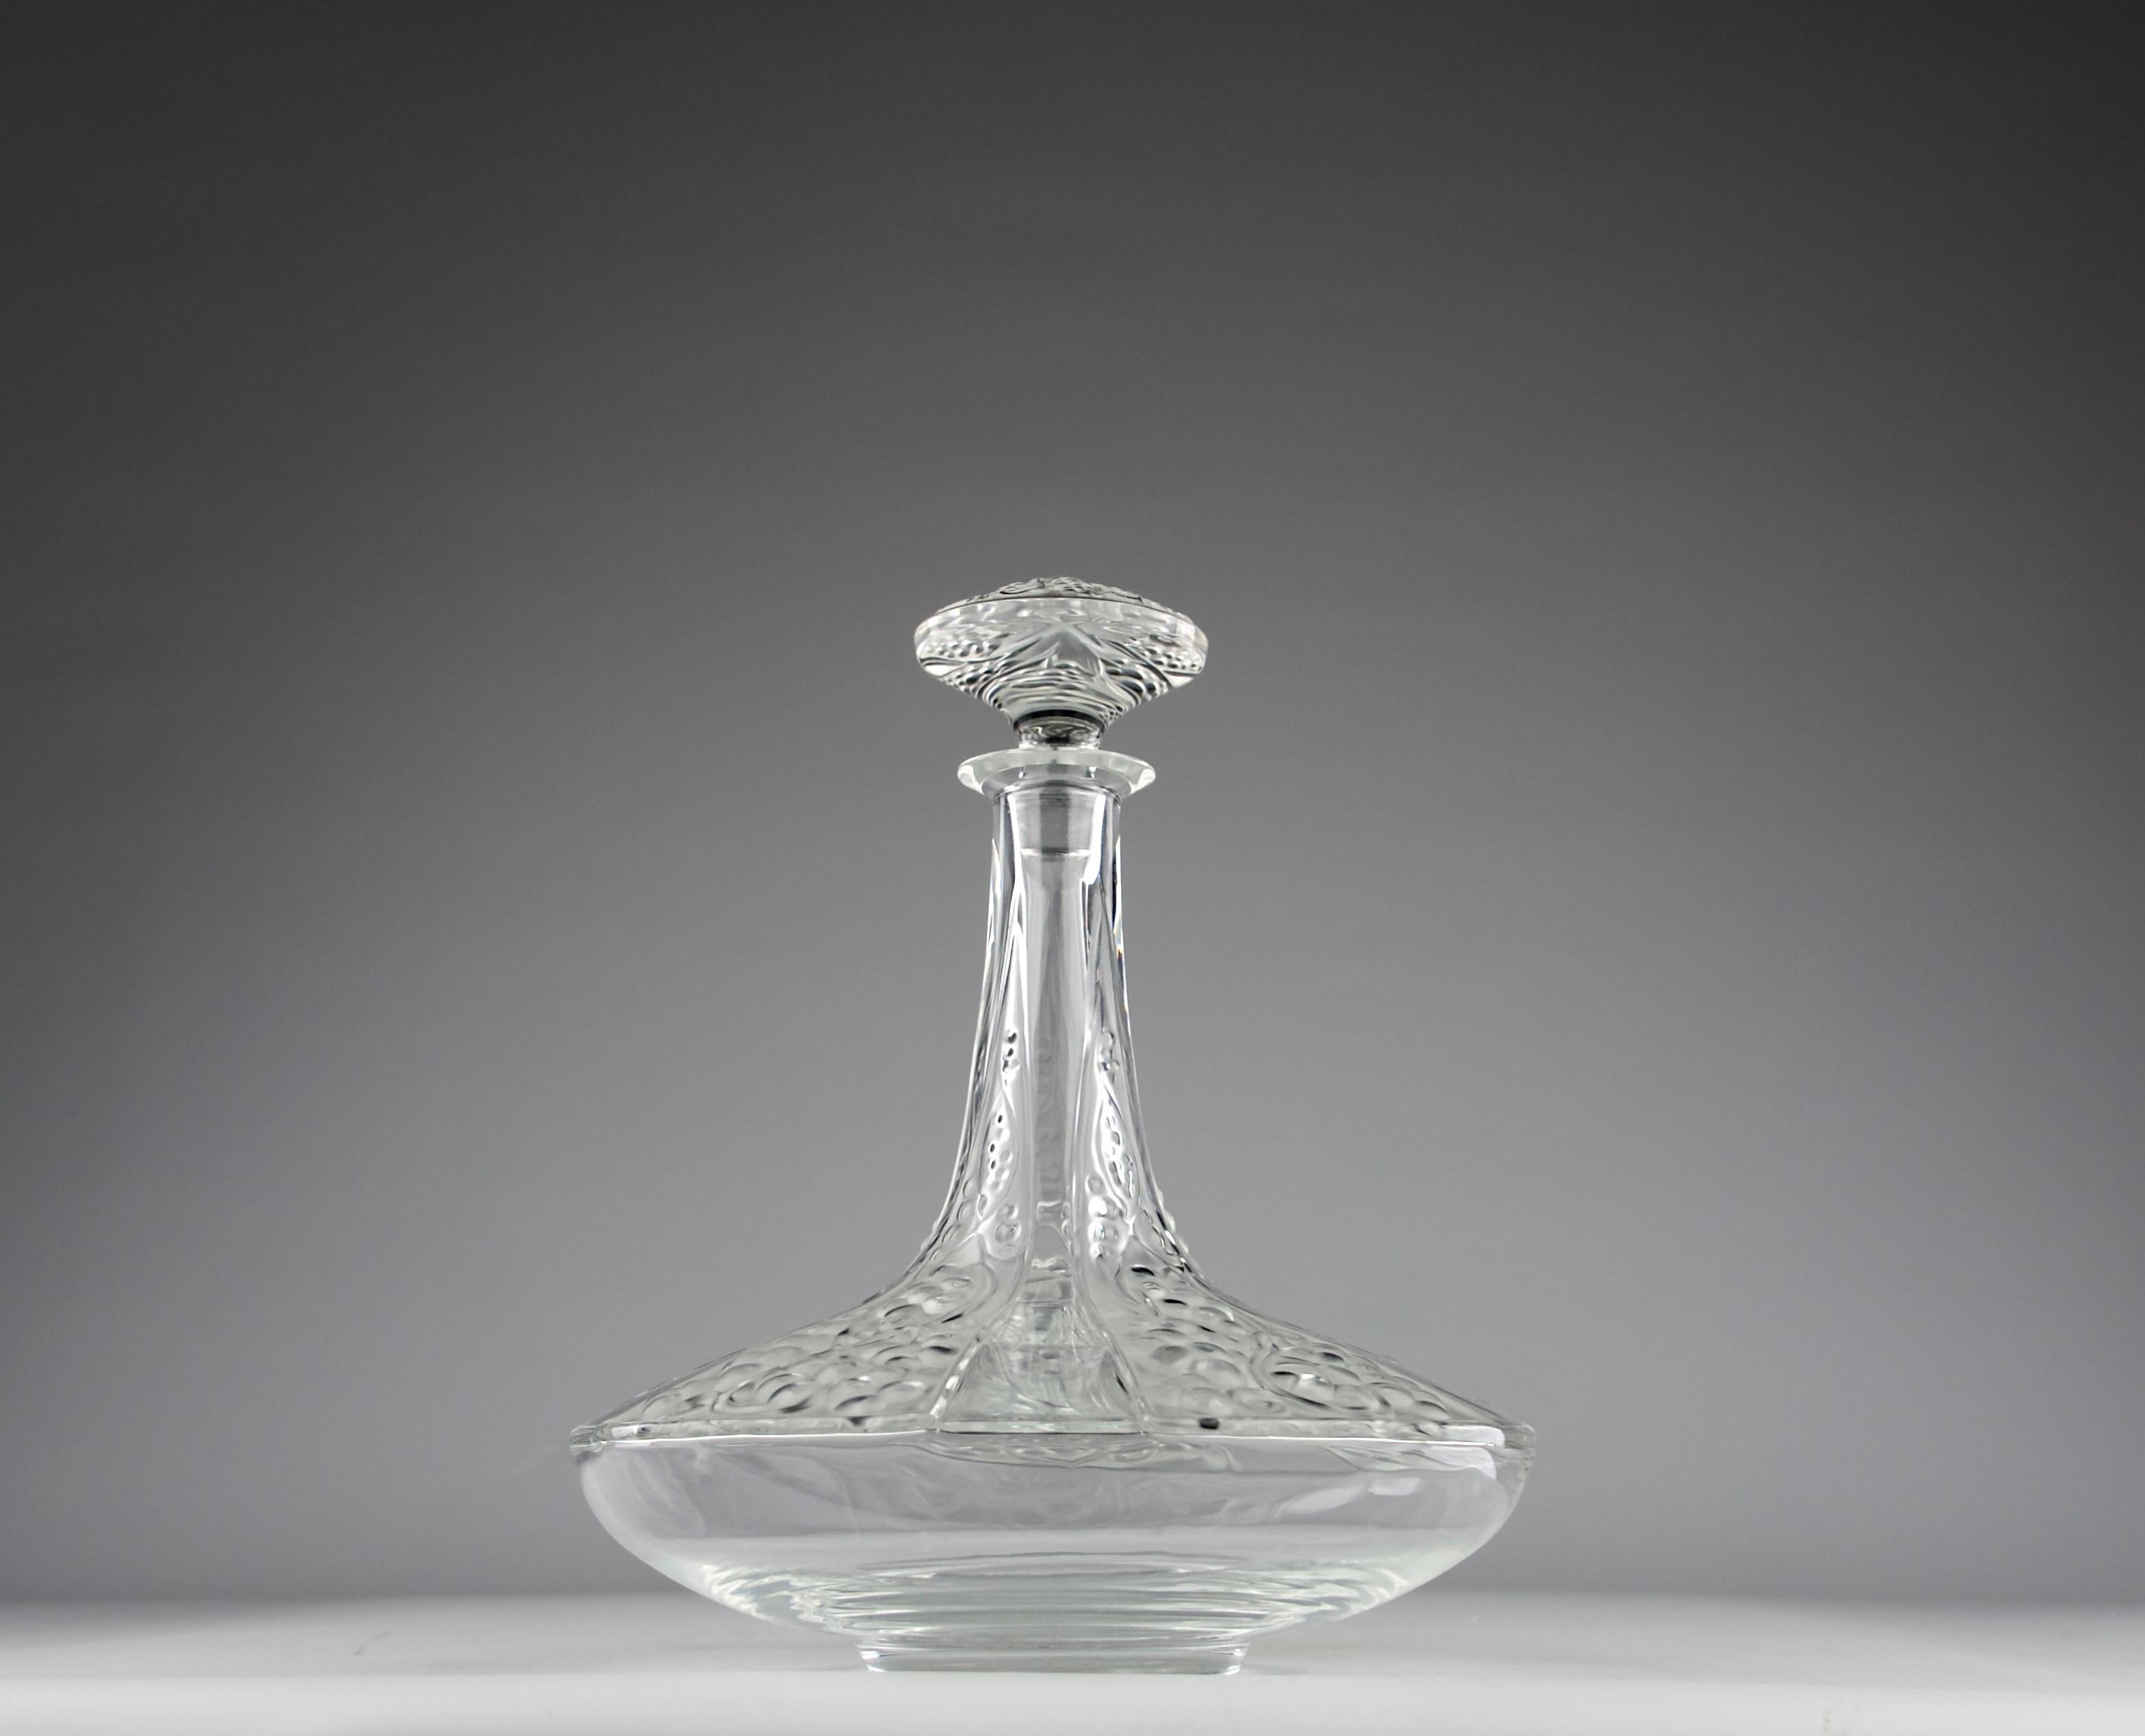 Superb Lalique wine decanter with grape vine decorations, France 2000s. Signed Lalique France and stopper numbered 292.

Dimensions in cm ( H x D ) : 25 x 20

Very good condition.

Secure shipping.